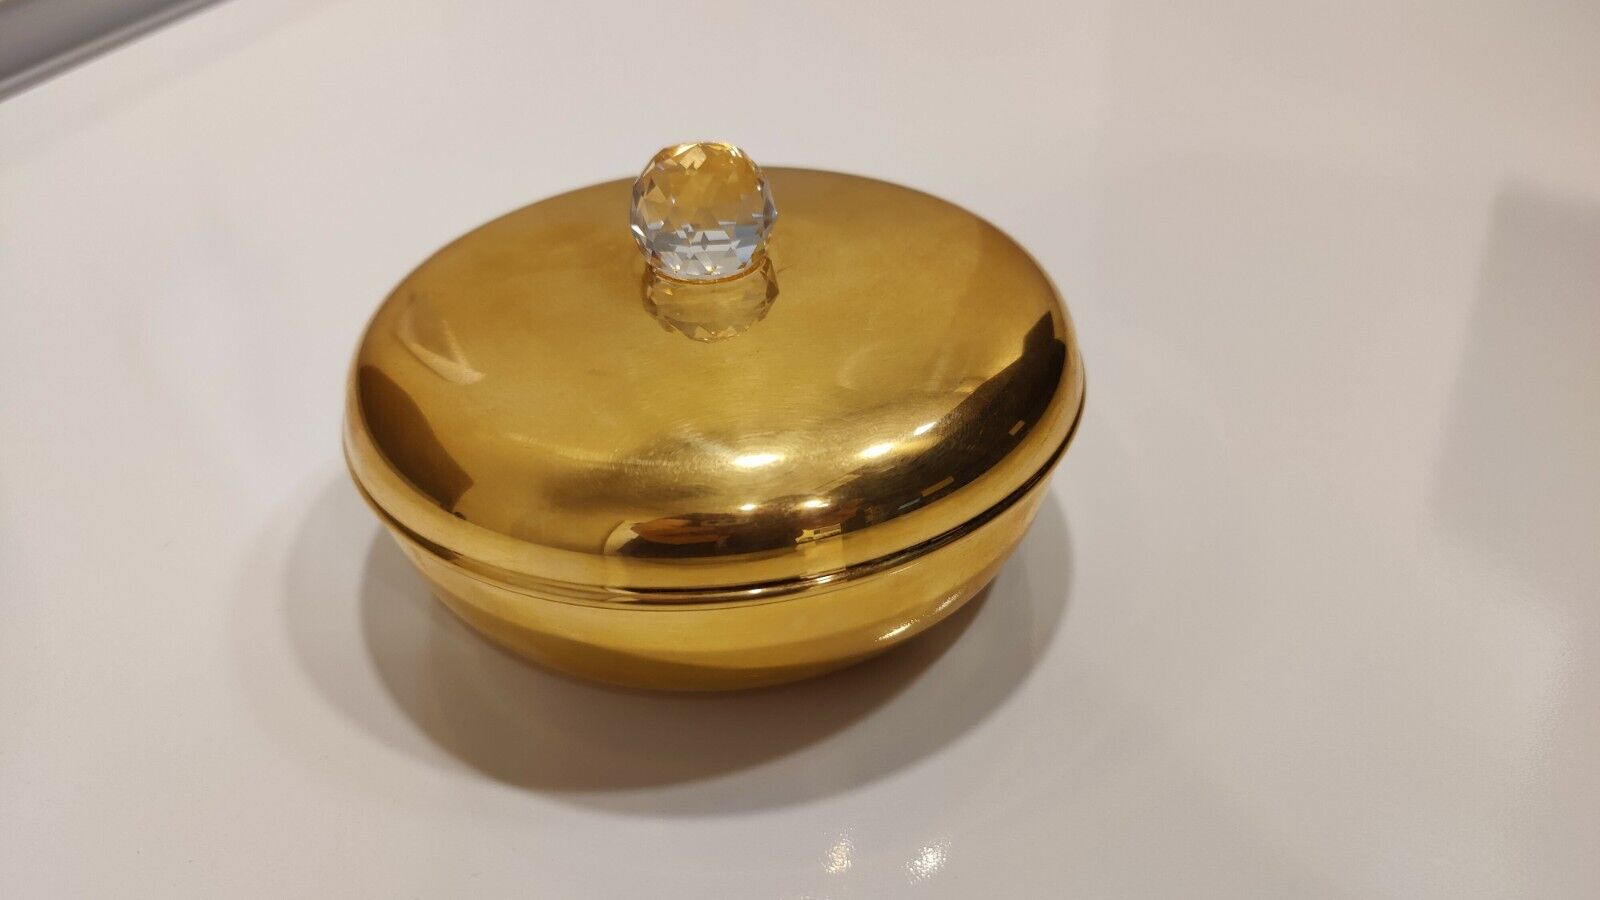 Vintage Valerio Albarello Candy/Trinket Dish with Lid - 24K Gold electroplated